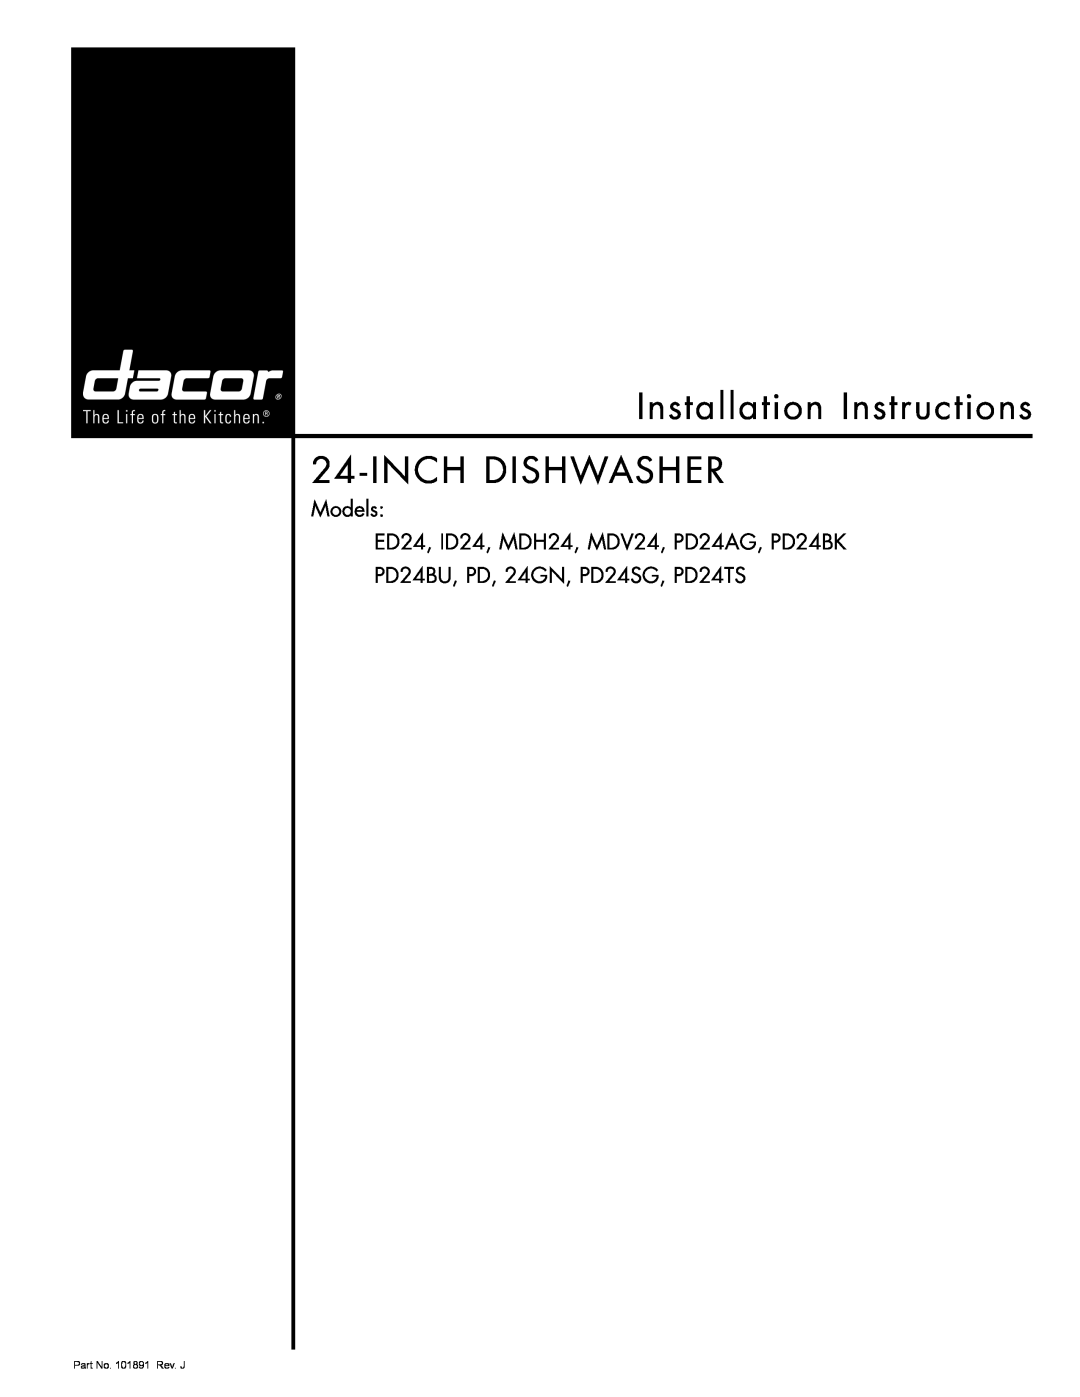 Dacor installation instructions Installation Instructions 24- INCH DISHWASHER, PD24BU, PD, 24GN, PD24SG, PD24TS 